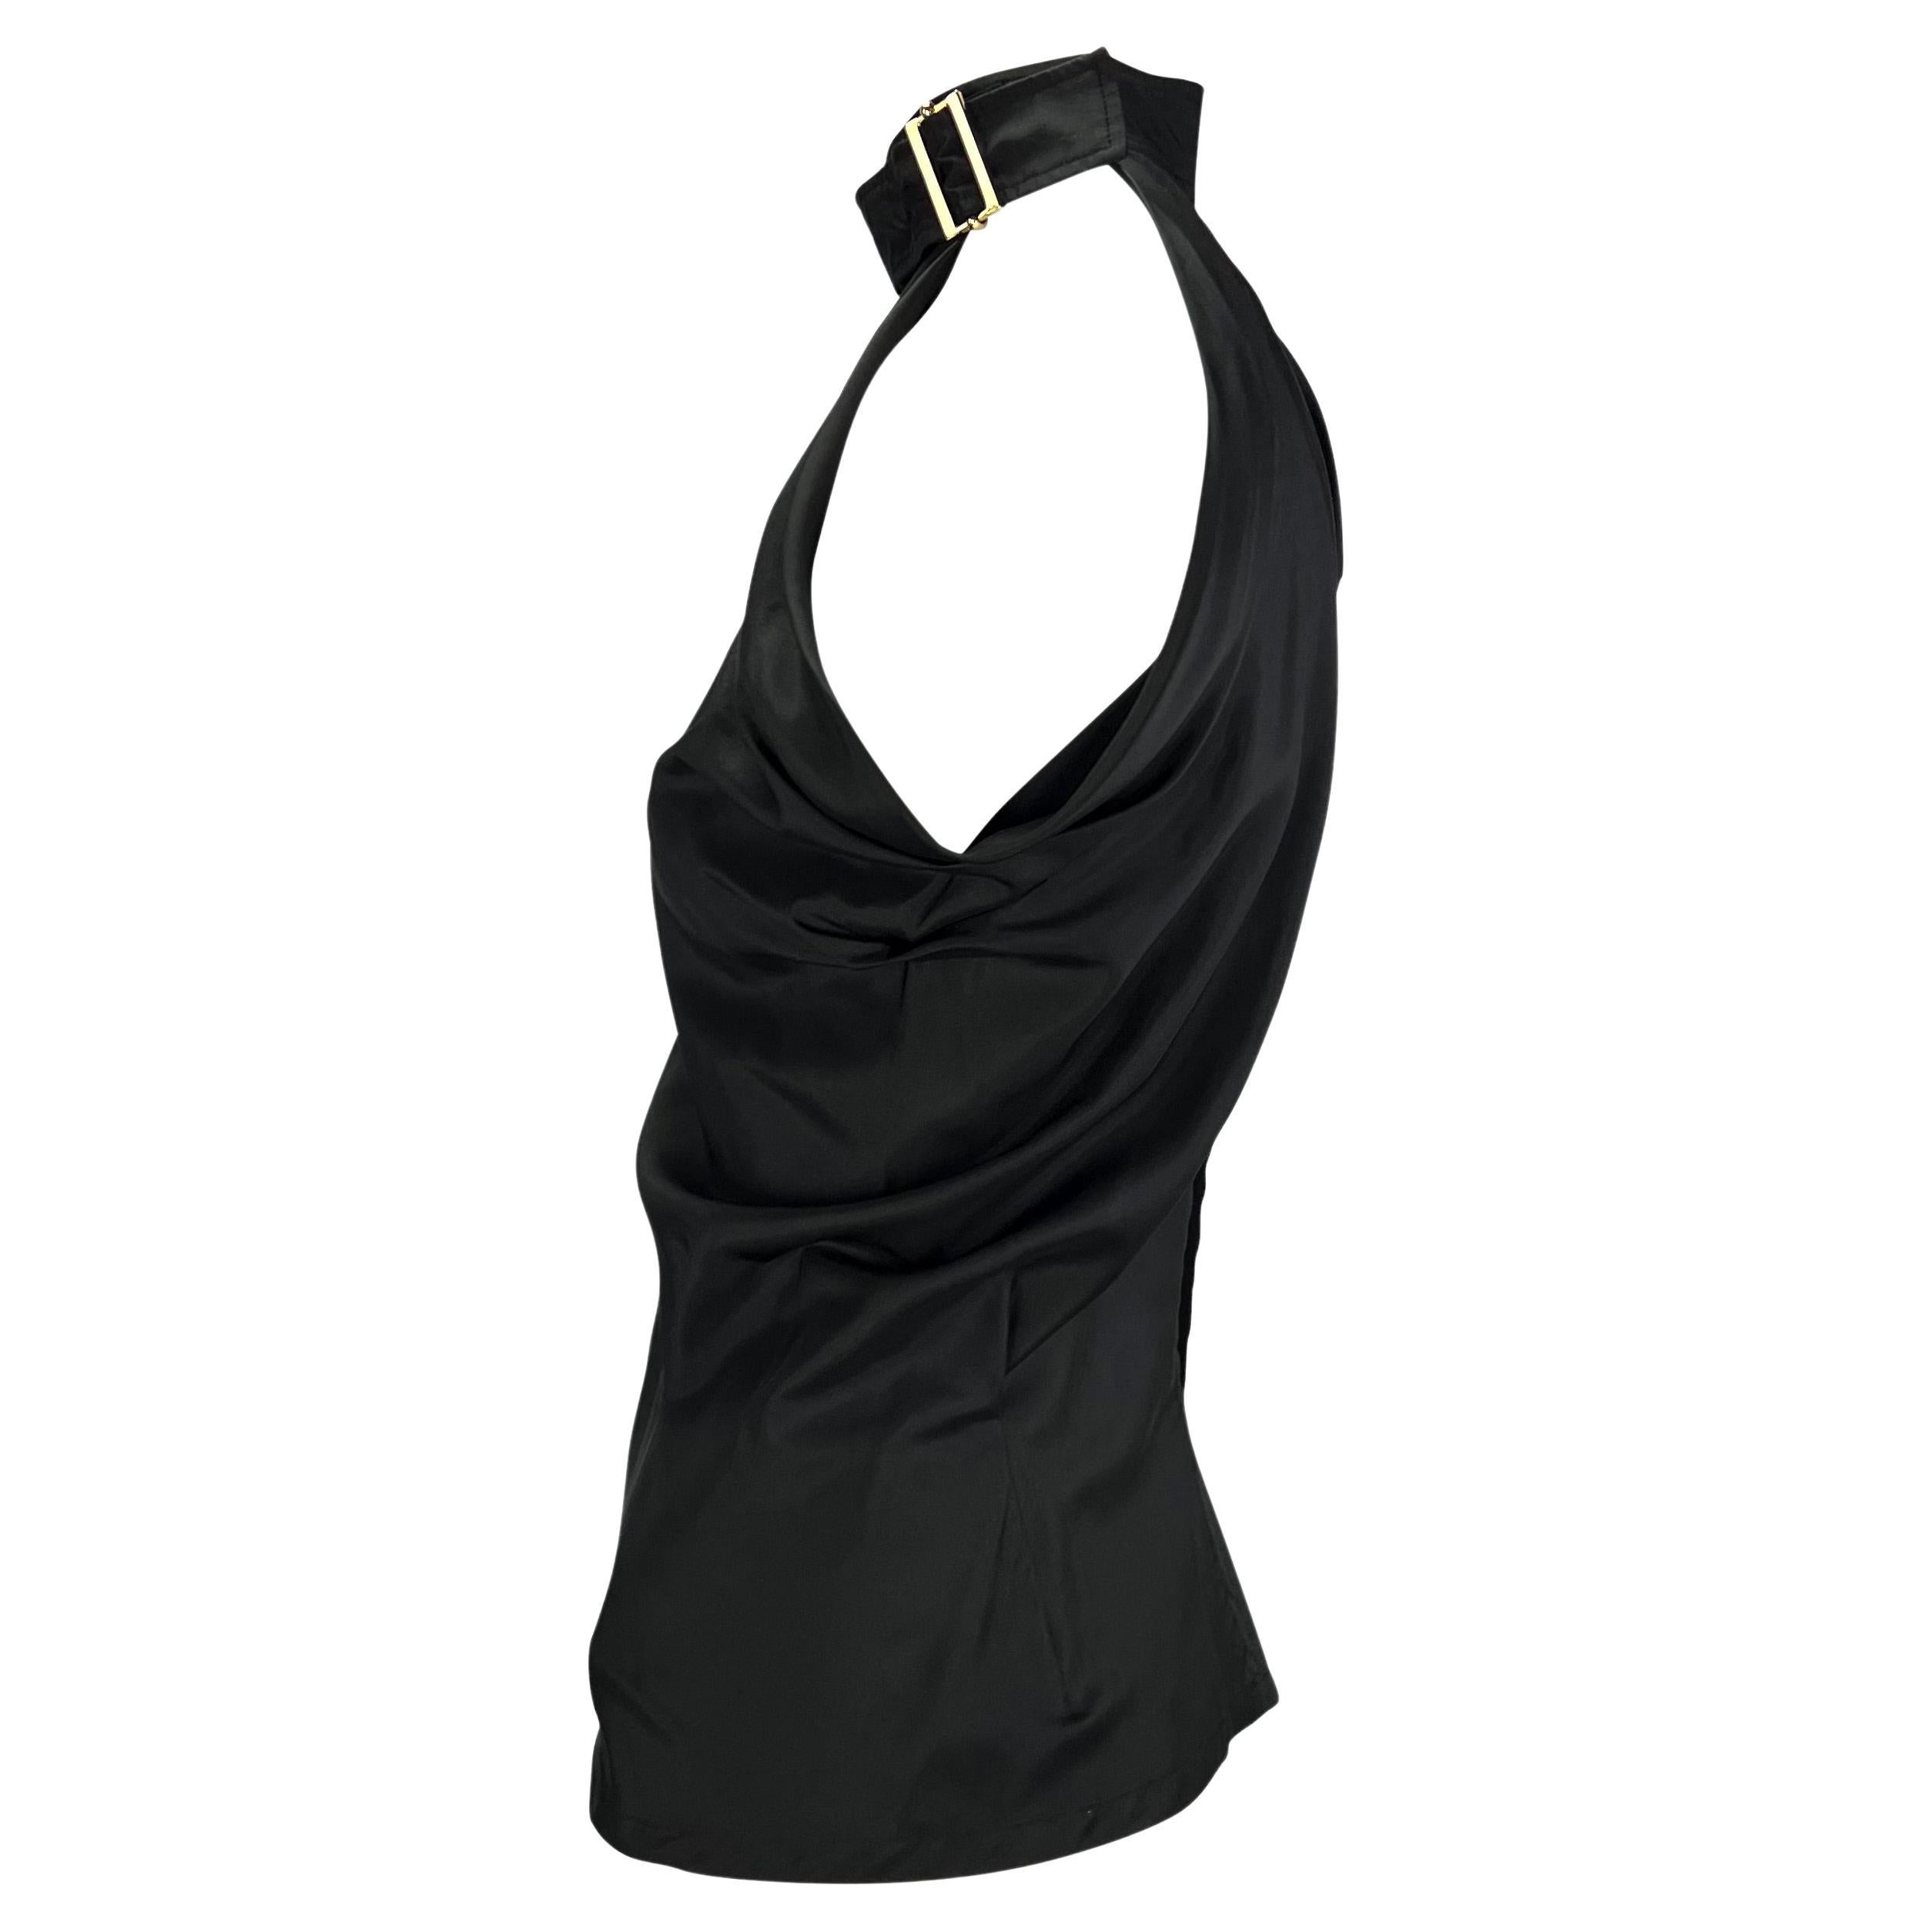 S/S 2001 Yves Saint Laurent by Tom Ford Plunge Black Silk Sleeveless Buckle Top In Excellent Condition For Sale In West Hollywood, CA